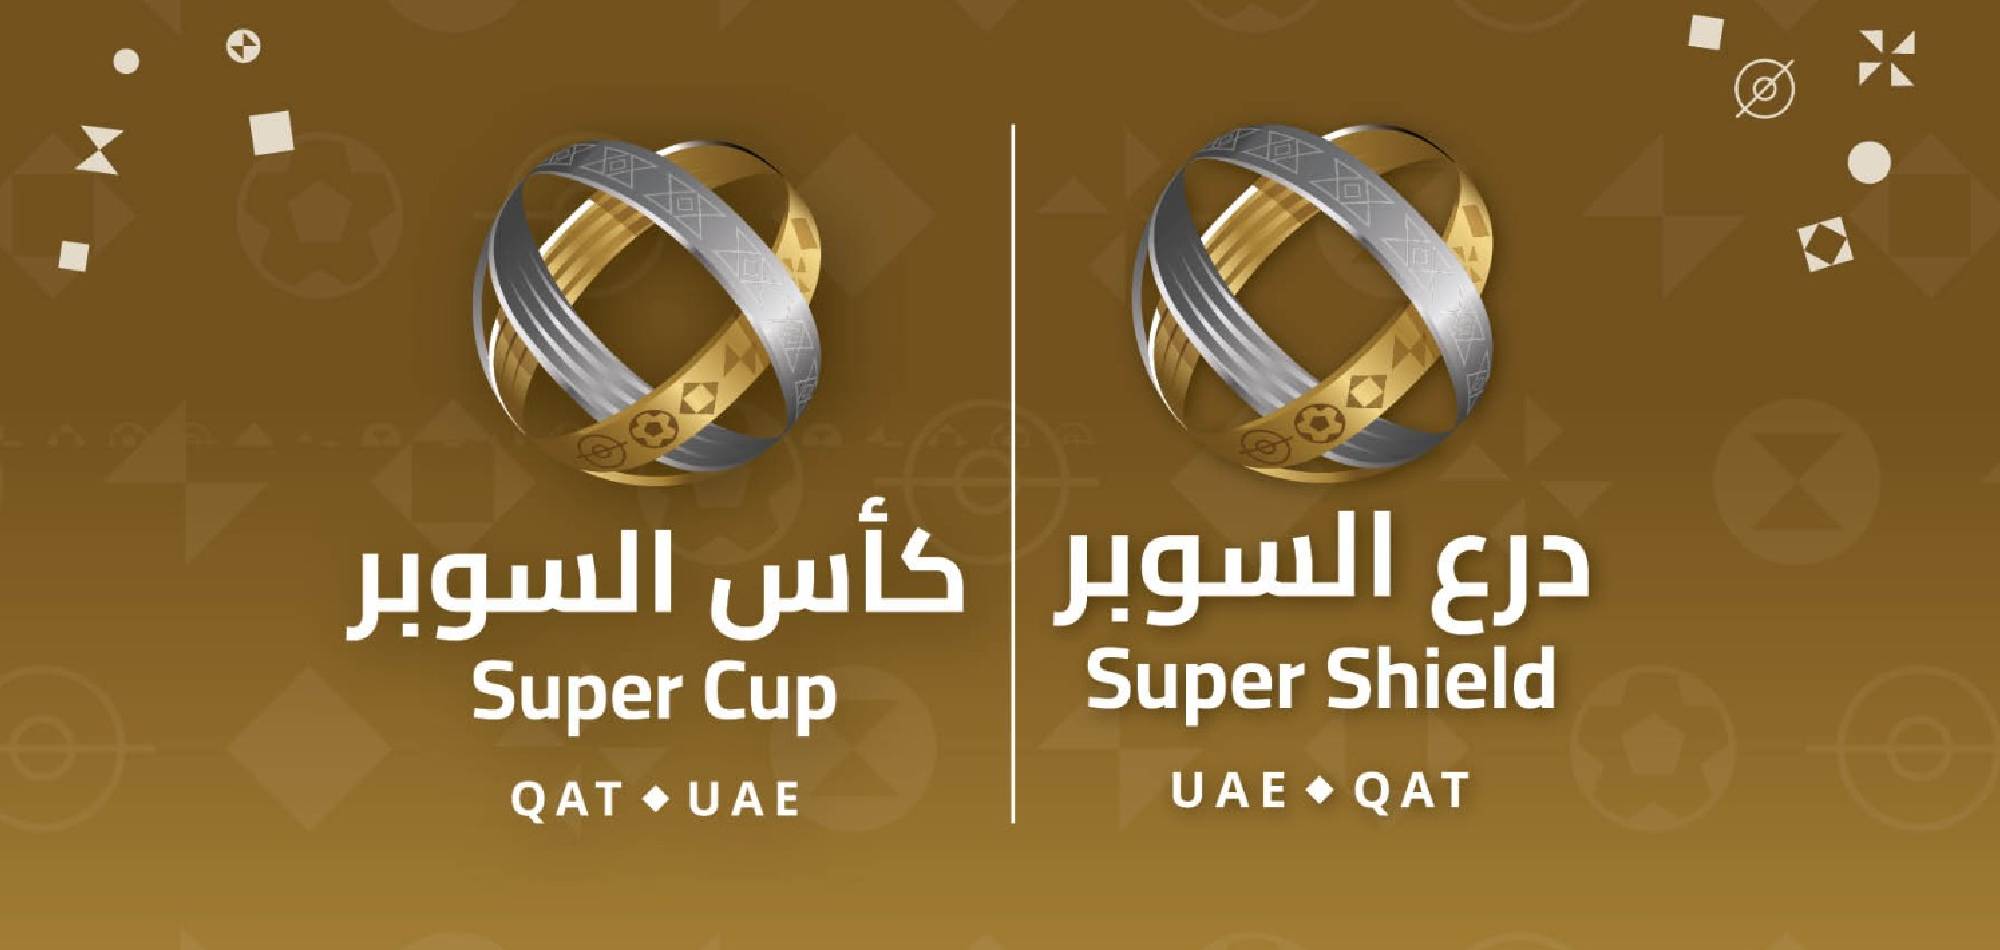 First-ever Qatar-UAE Super Cup set to kick off in April